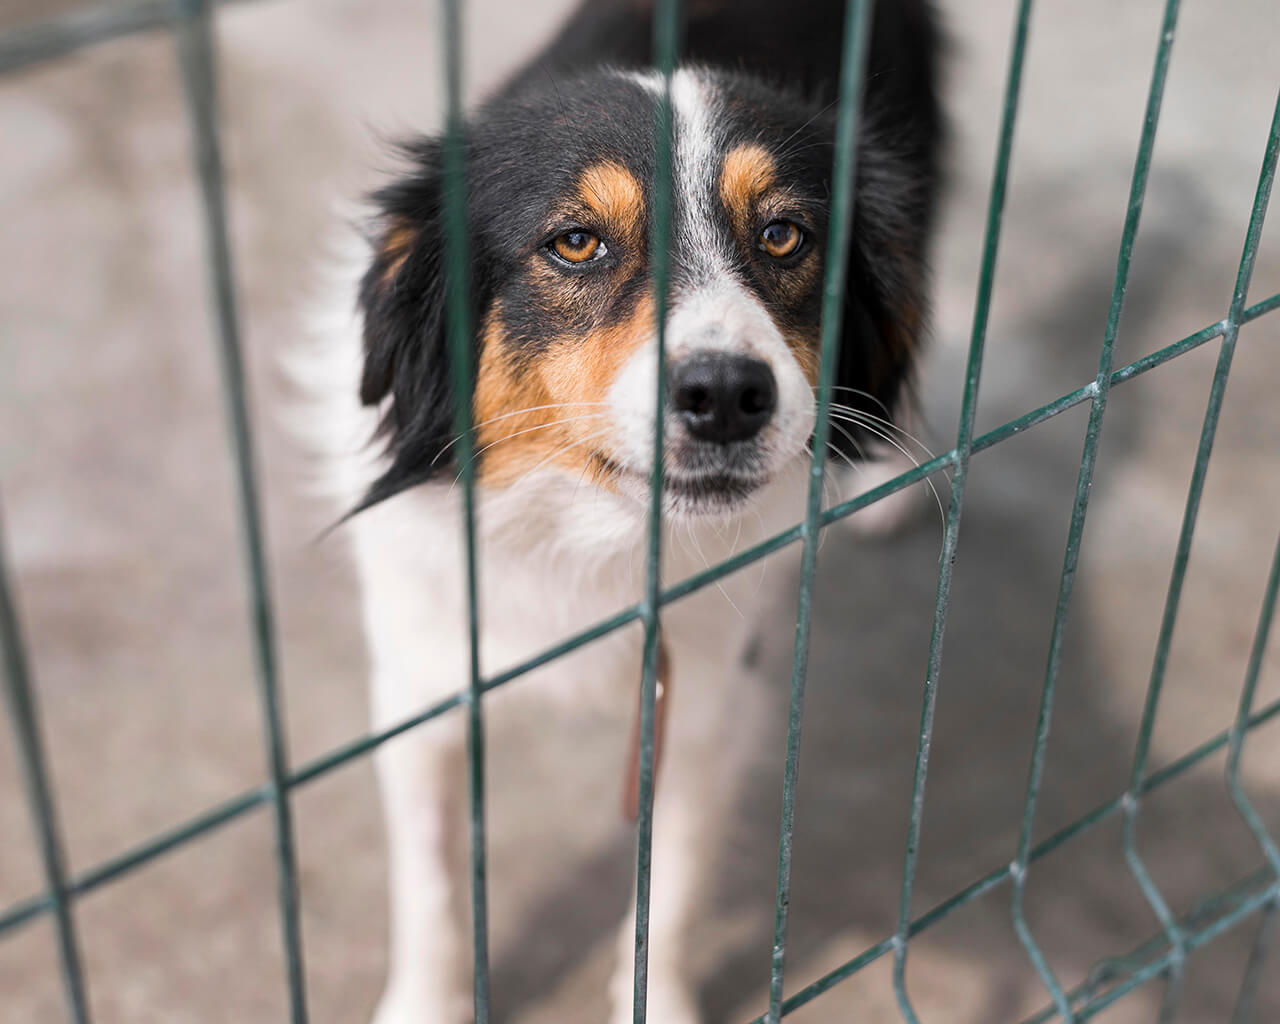 A dog in a shelter.